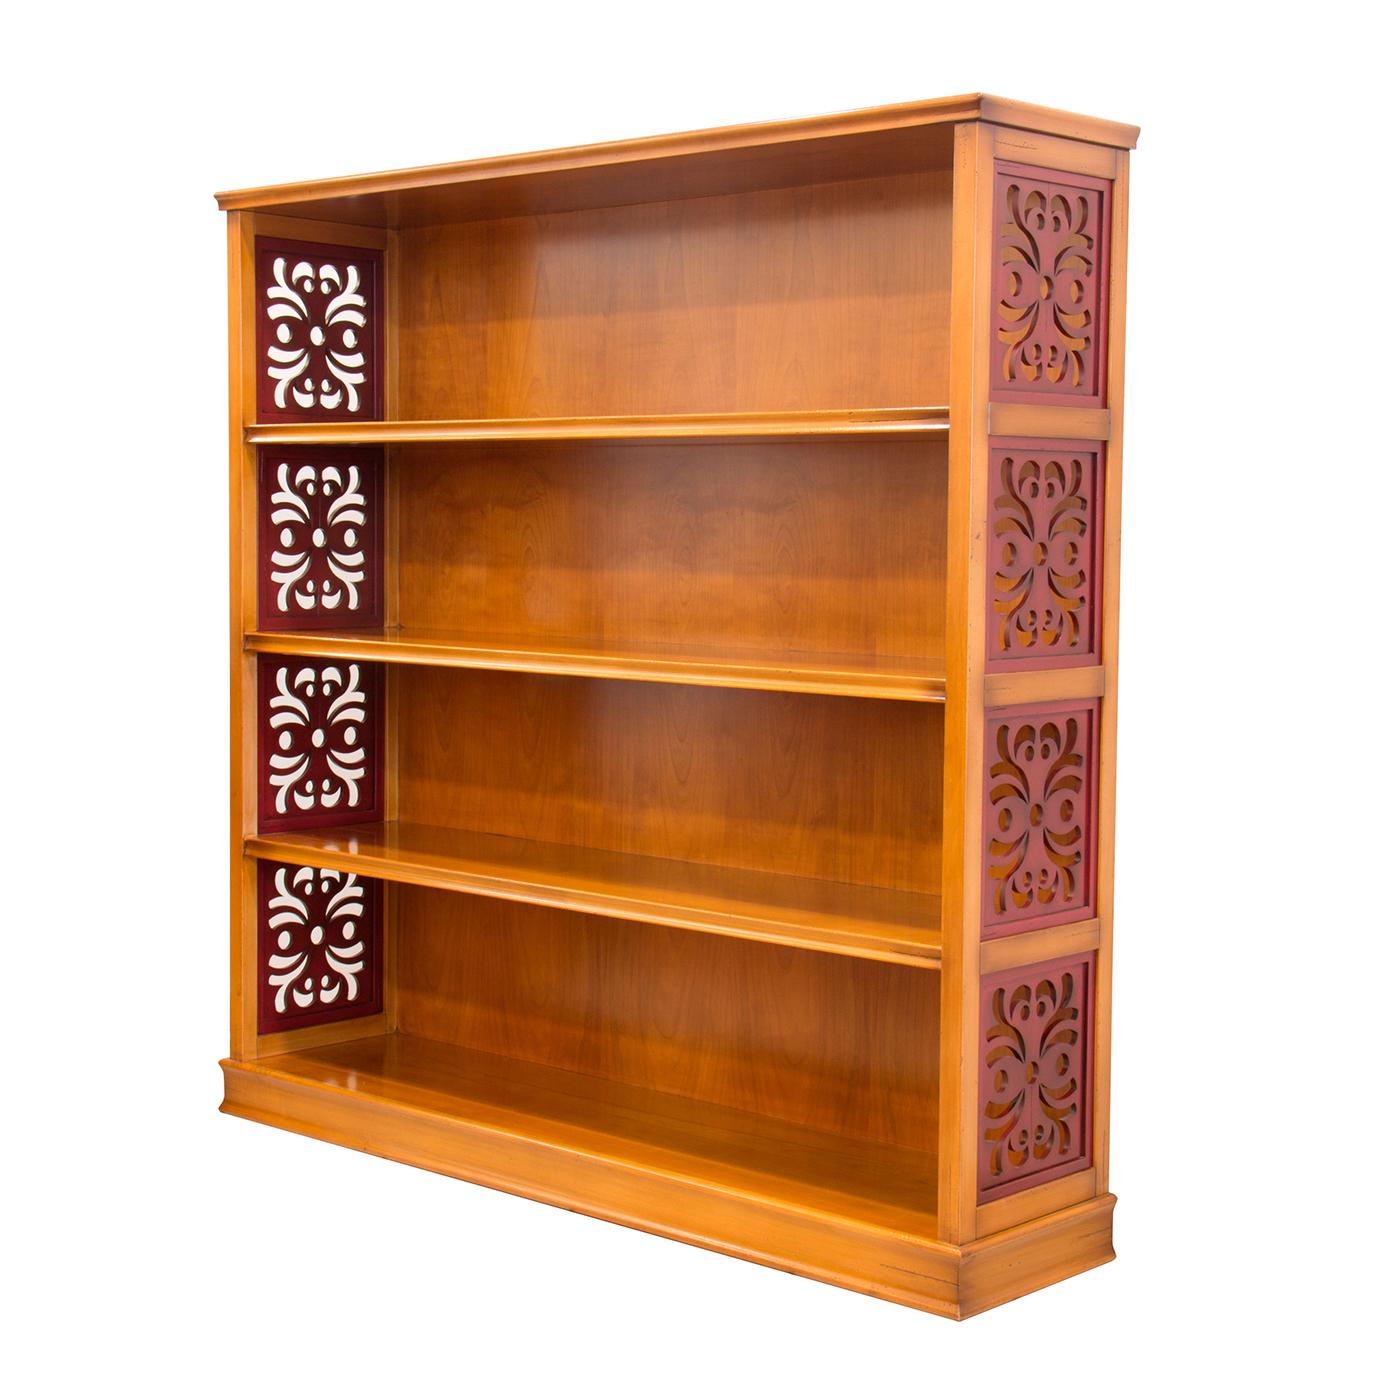 A stunning piece of functional decor, this bookcase will be a sophisticated addition to a living room or studio, showcasing books and prized objets d'art. Entirely crafted of cherry wood, it features four shelves and boasts splendid decorative inlay